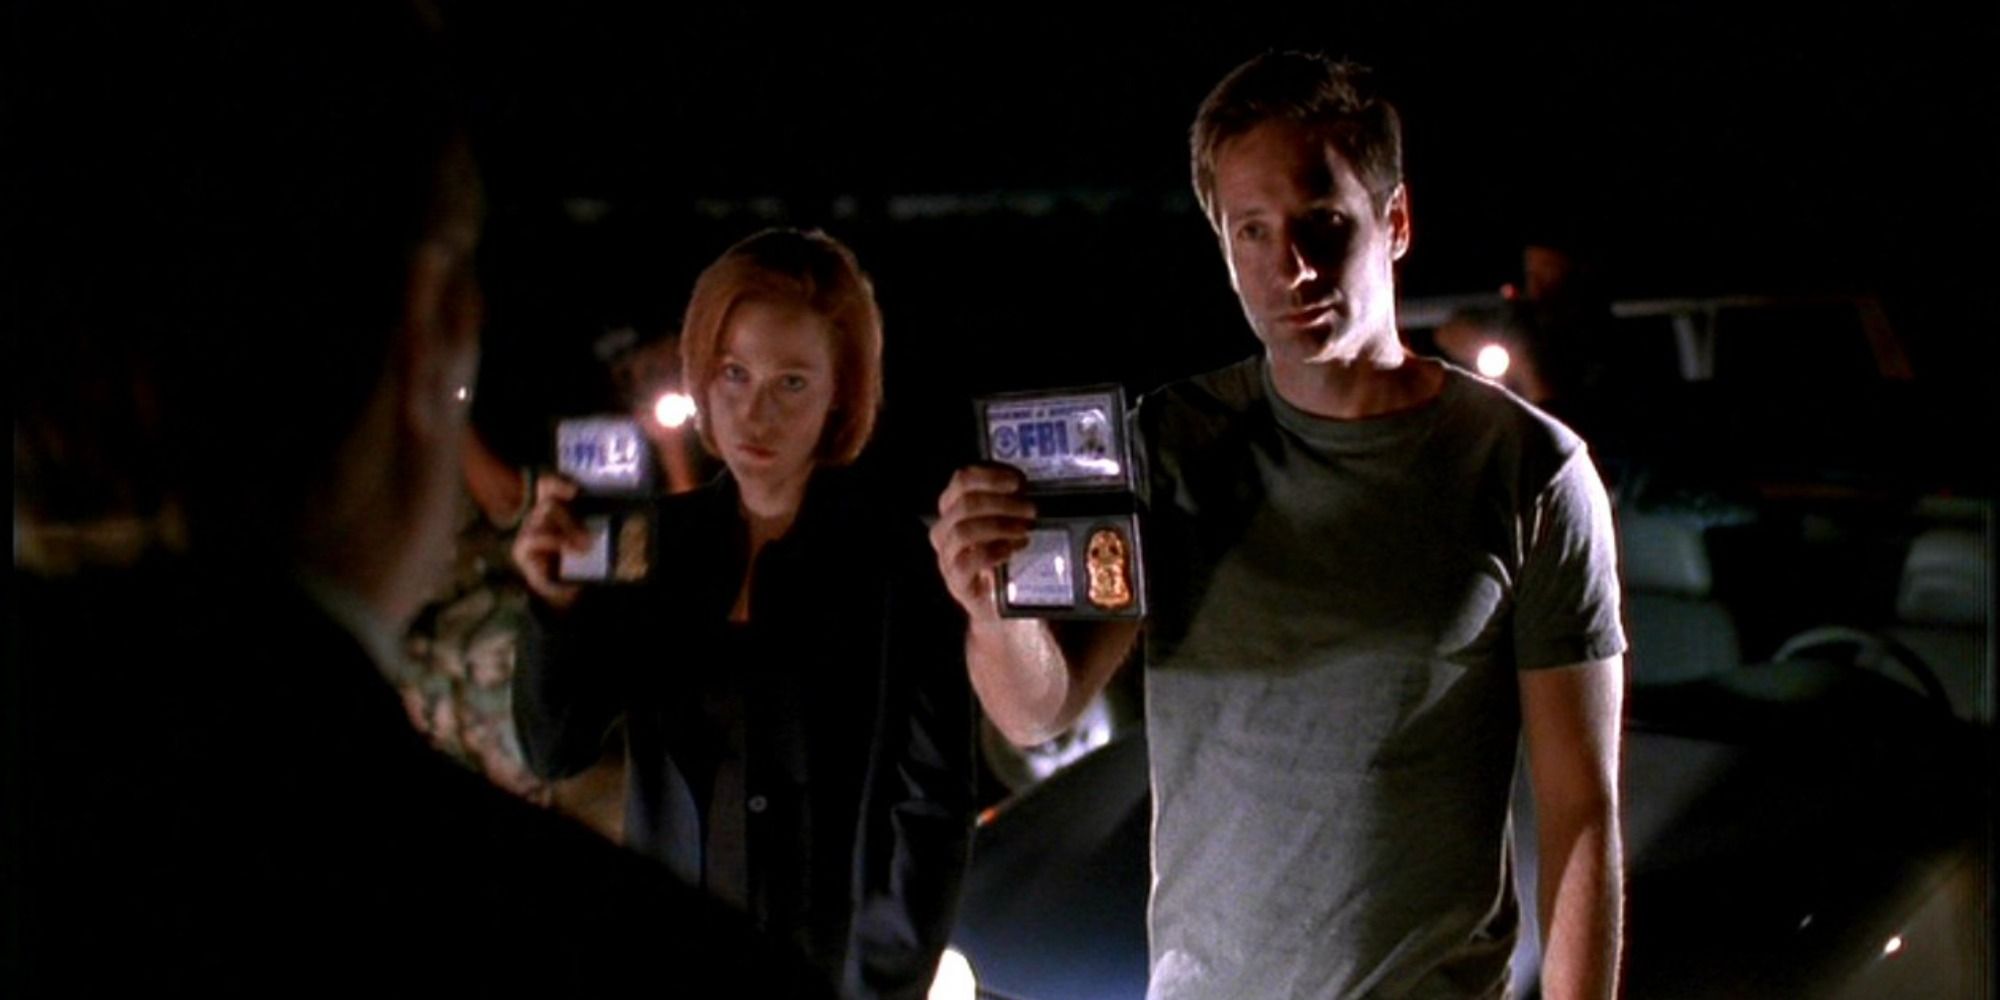 Gillian Anderson and David Duchovny show their badges in The X-Files